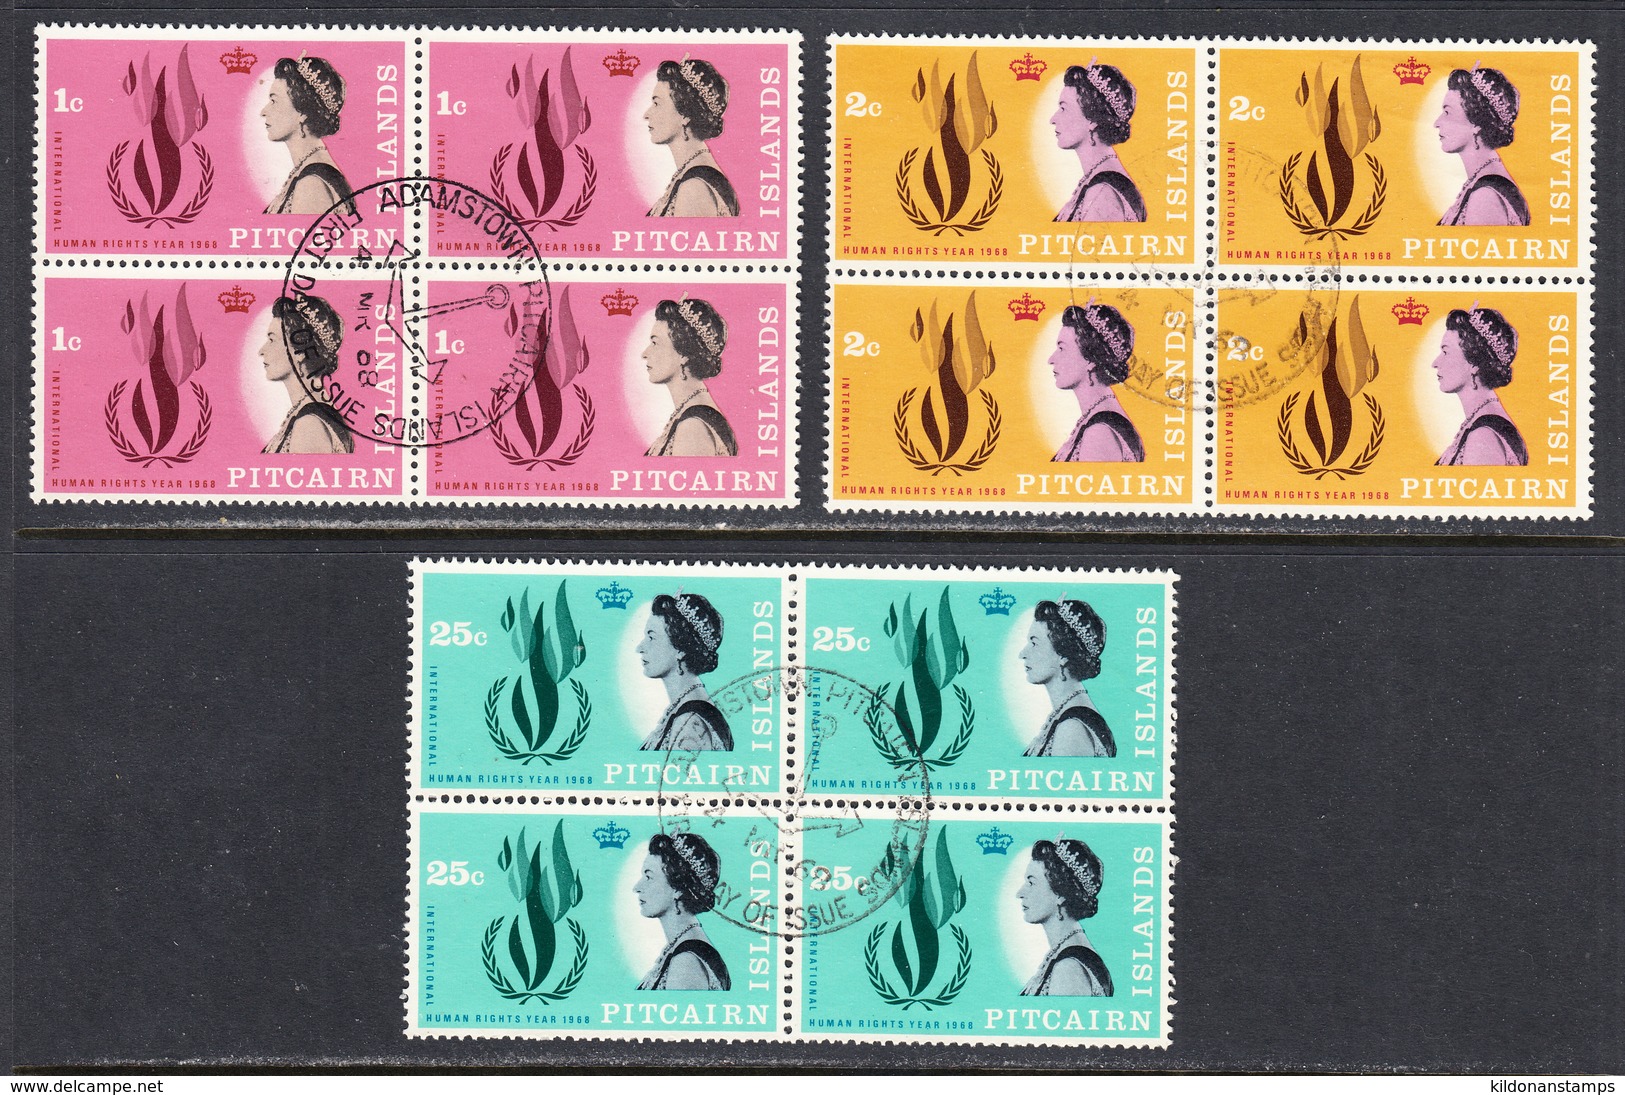 Pitcairn Islands 1968 Cancelled, First Day Of Issue, Blocks, Sc# 88-90 - Pitcairn Islands